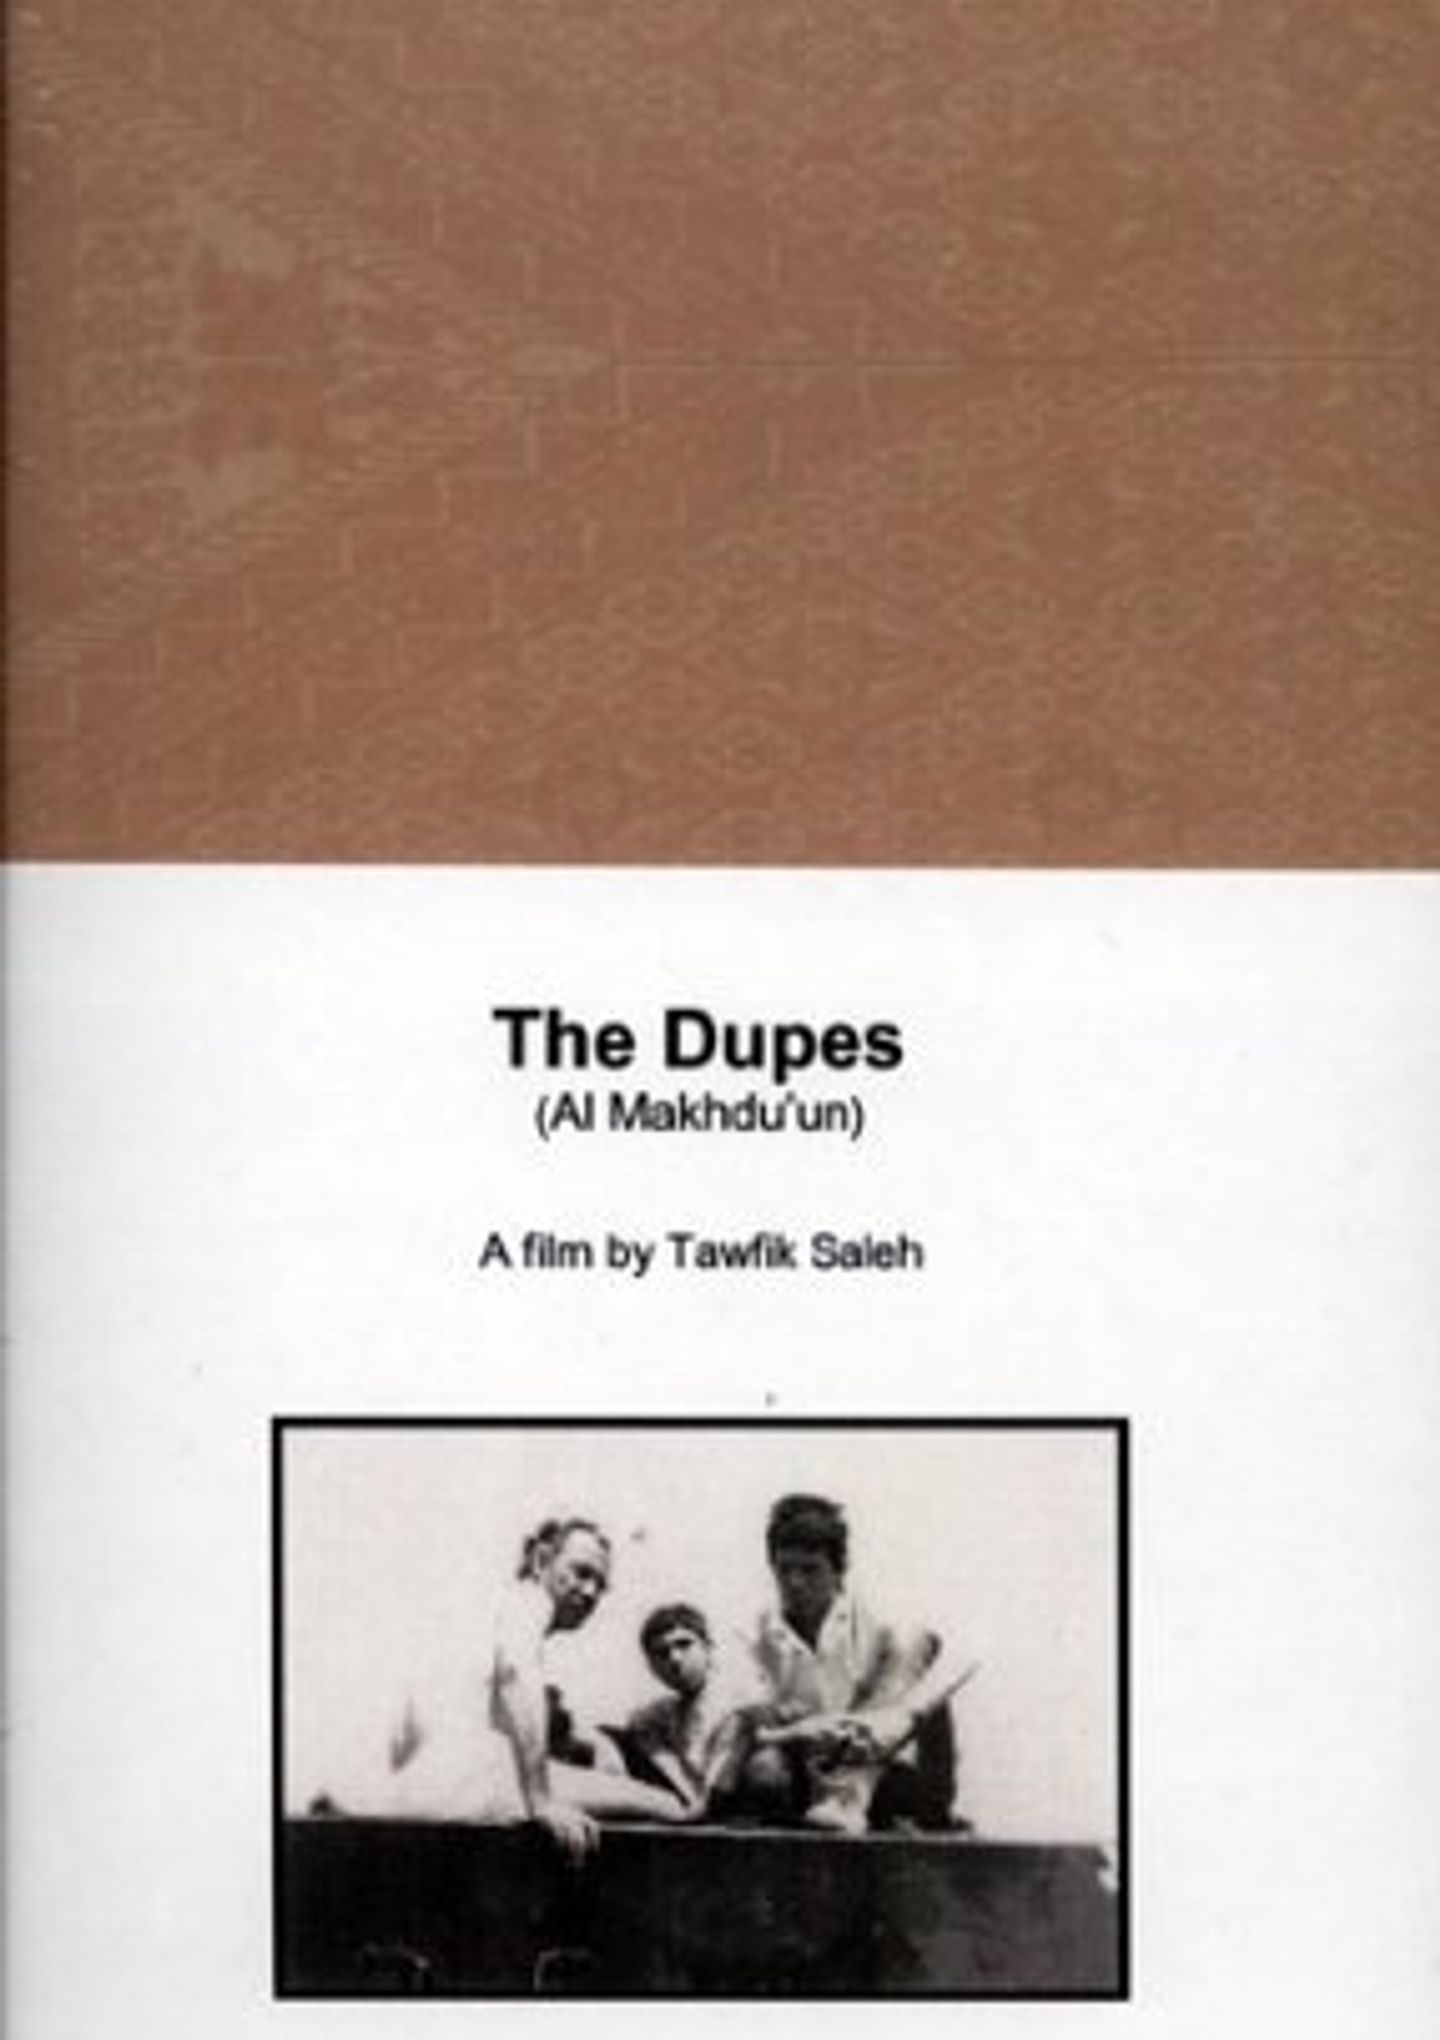 Plakat for 'The Dupes'